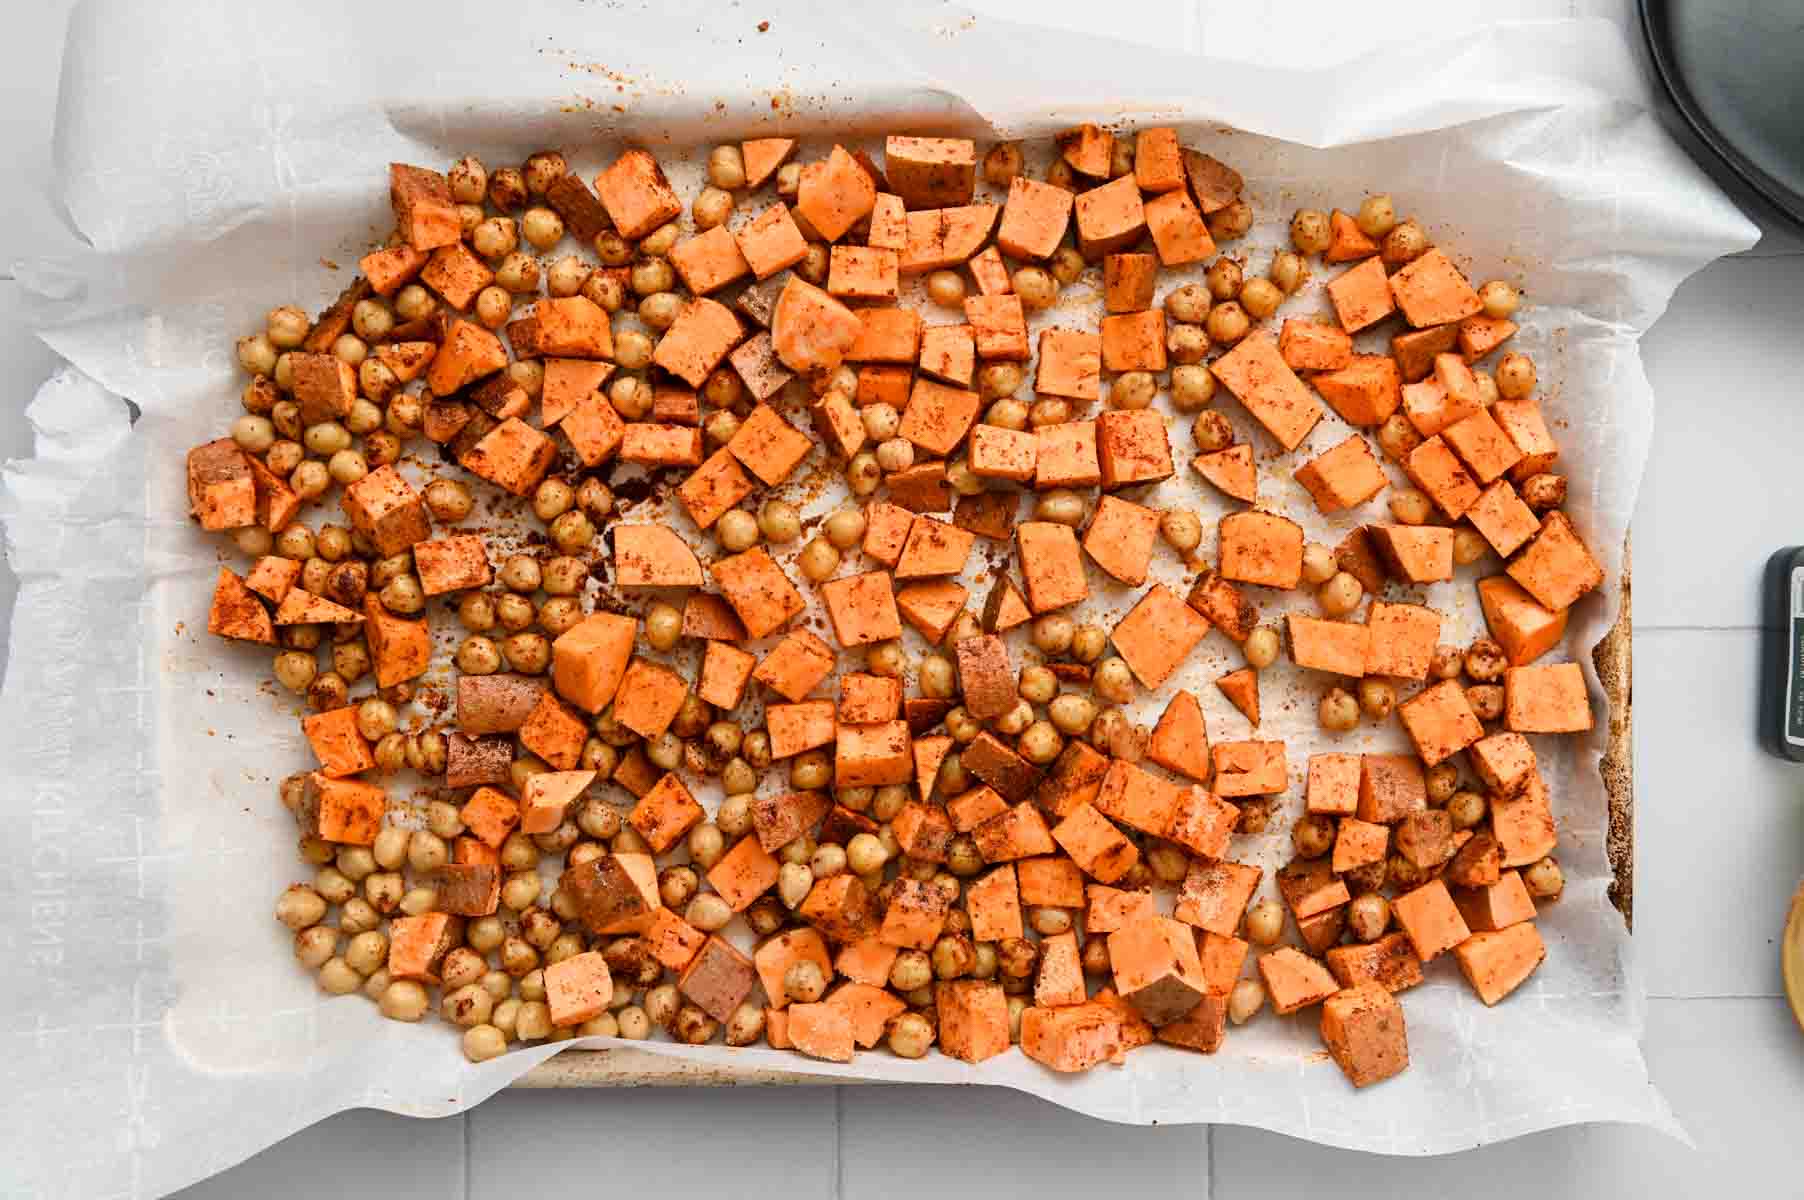 Cubed sweet potato and quinoa on a parhcment paper lined baking sheet.